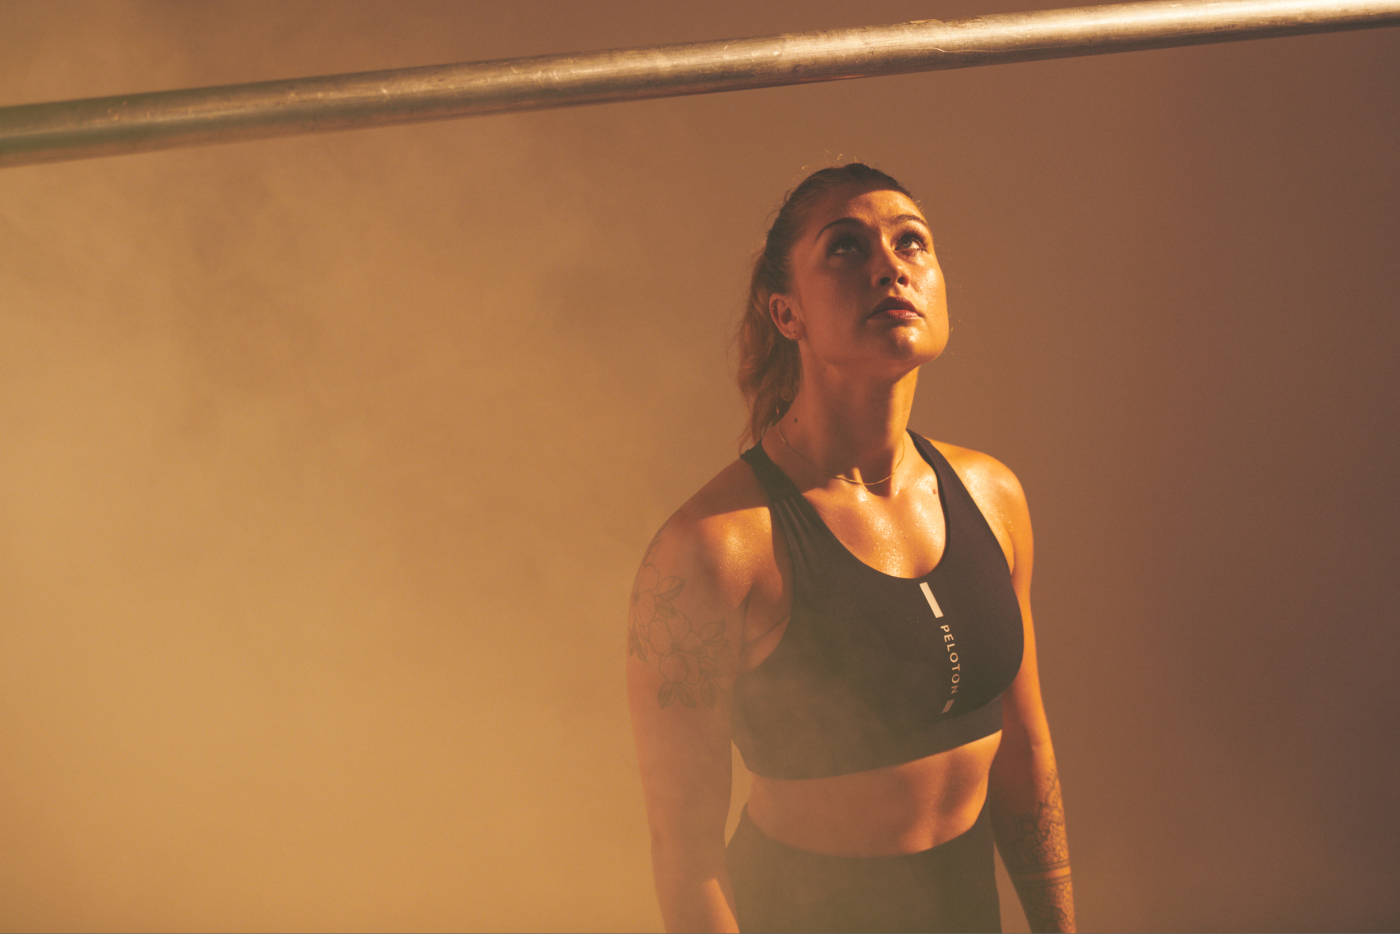 Sports and lifestyle photographer Dominic Marley photographs Charlotte Weidenbach for Peloton in London in this sweaty workout shoot.